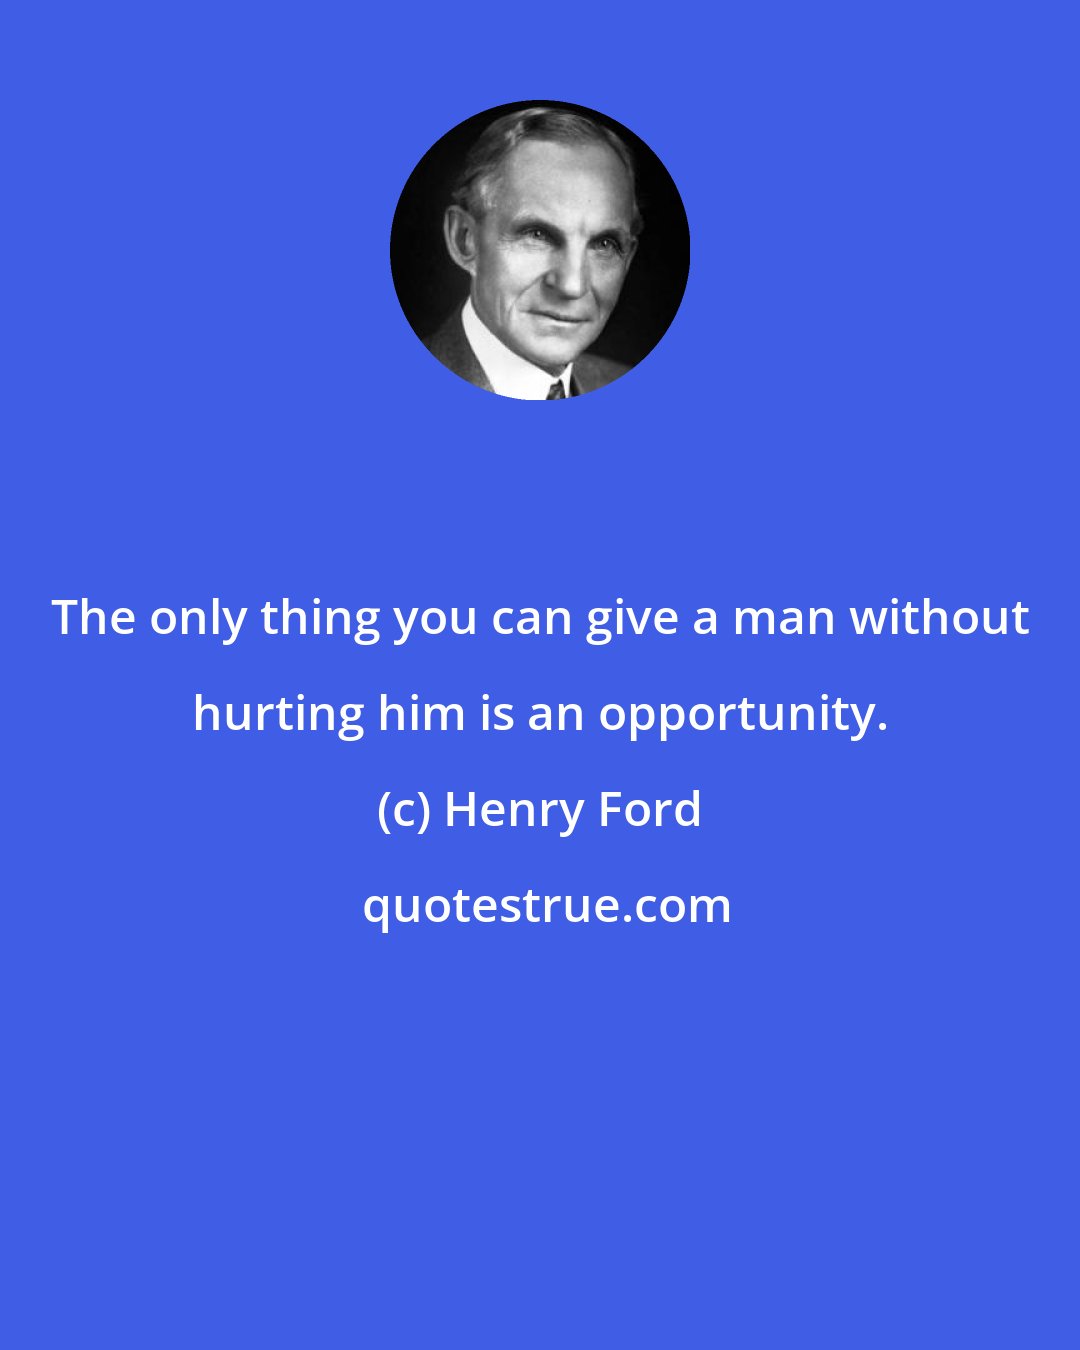 Henry Ford: The only thing you can give a man without hurting him is an opportunity.